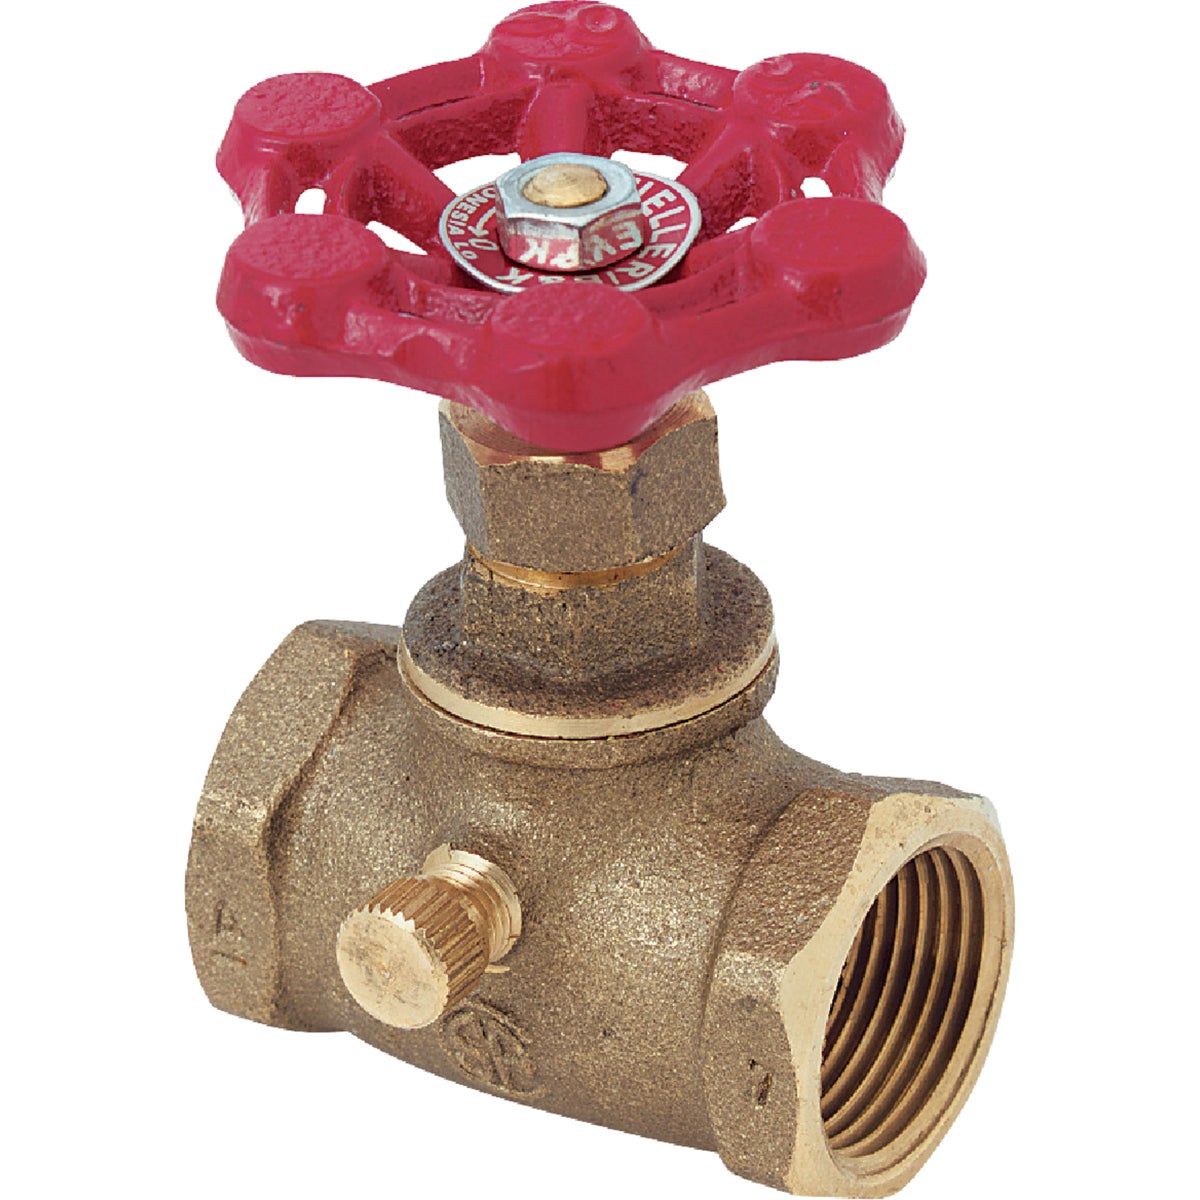 Item 459211, Valve is rated for maximum of 125 psi hot or cold water.